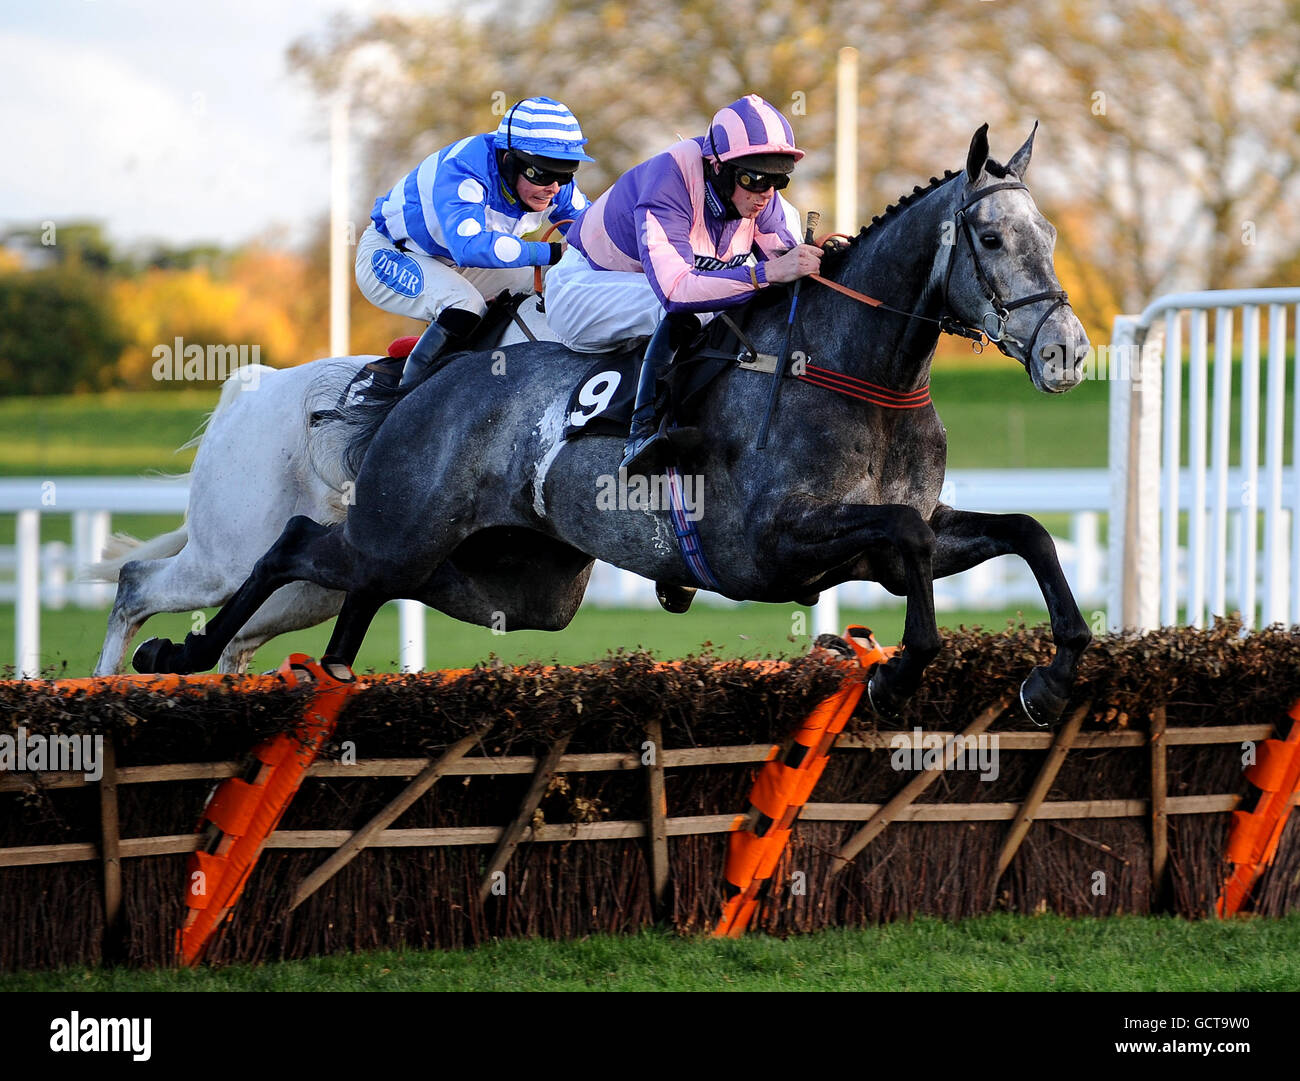 TOCCA FERRO ridden by Jack Doyle leads over the last hurdle to win The williamhill.com Handicap Hurdle Race. Stock Photo